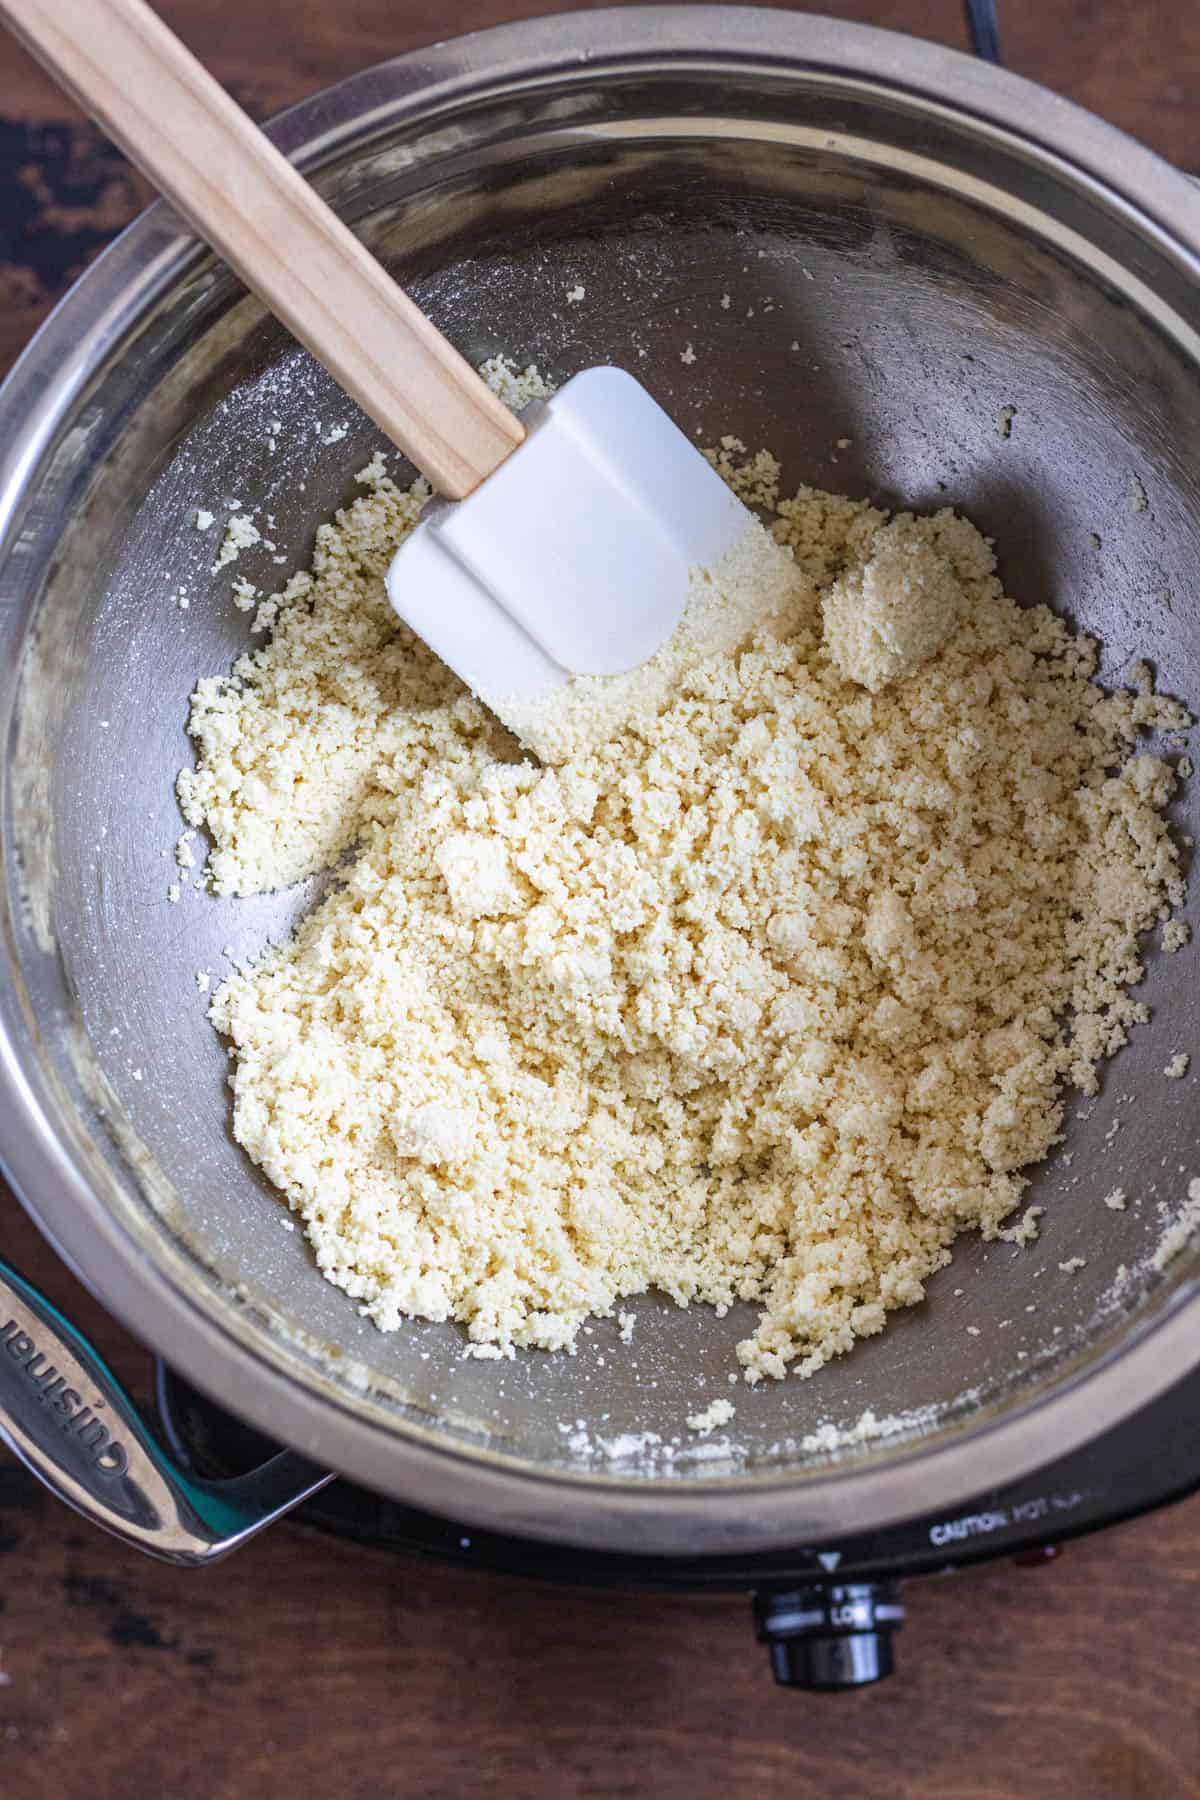 white chocolate recipe ingredients combined and in a crumbly form with a spatula in a metal bowl